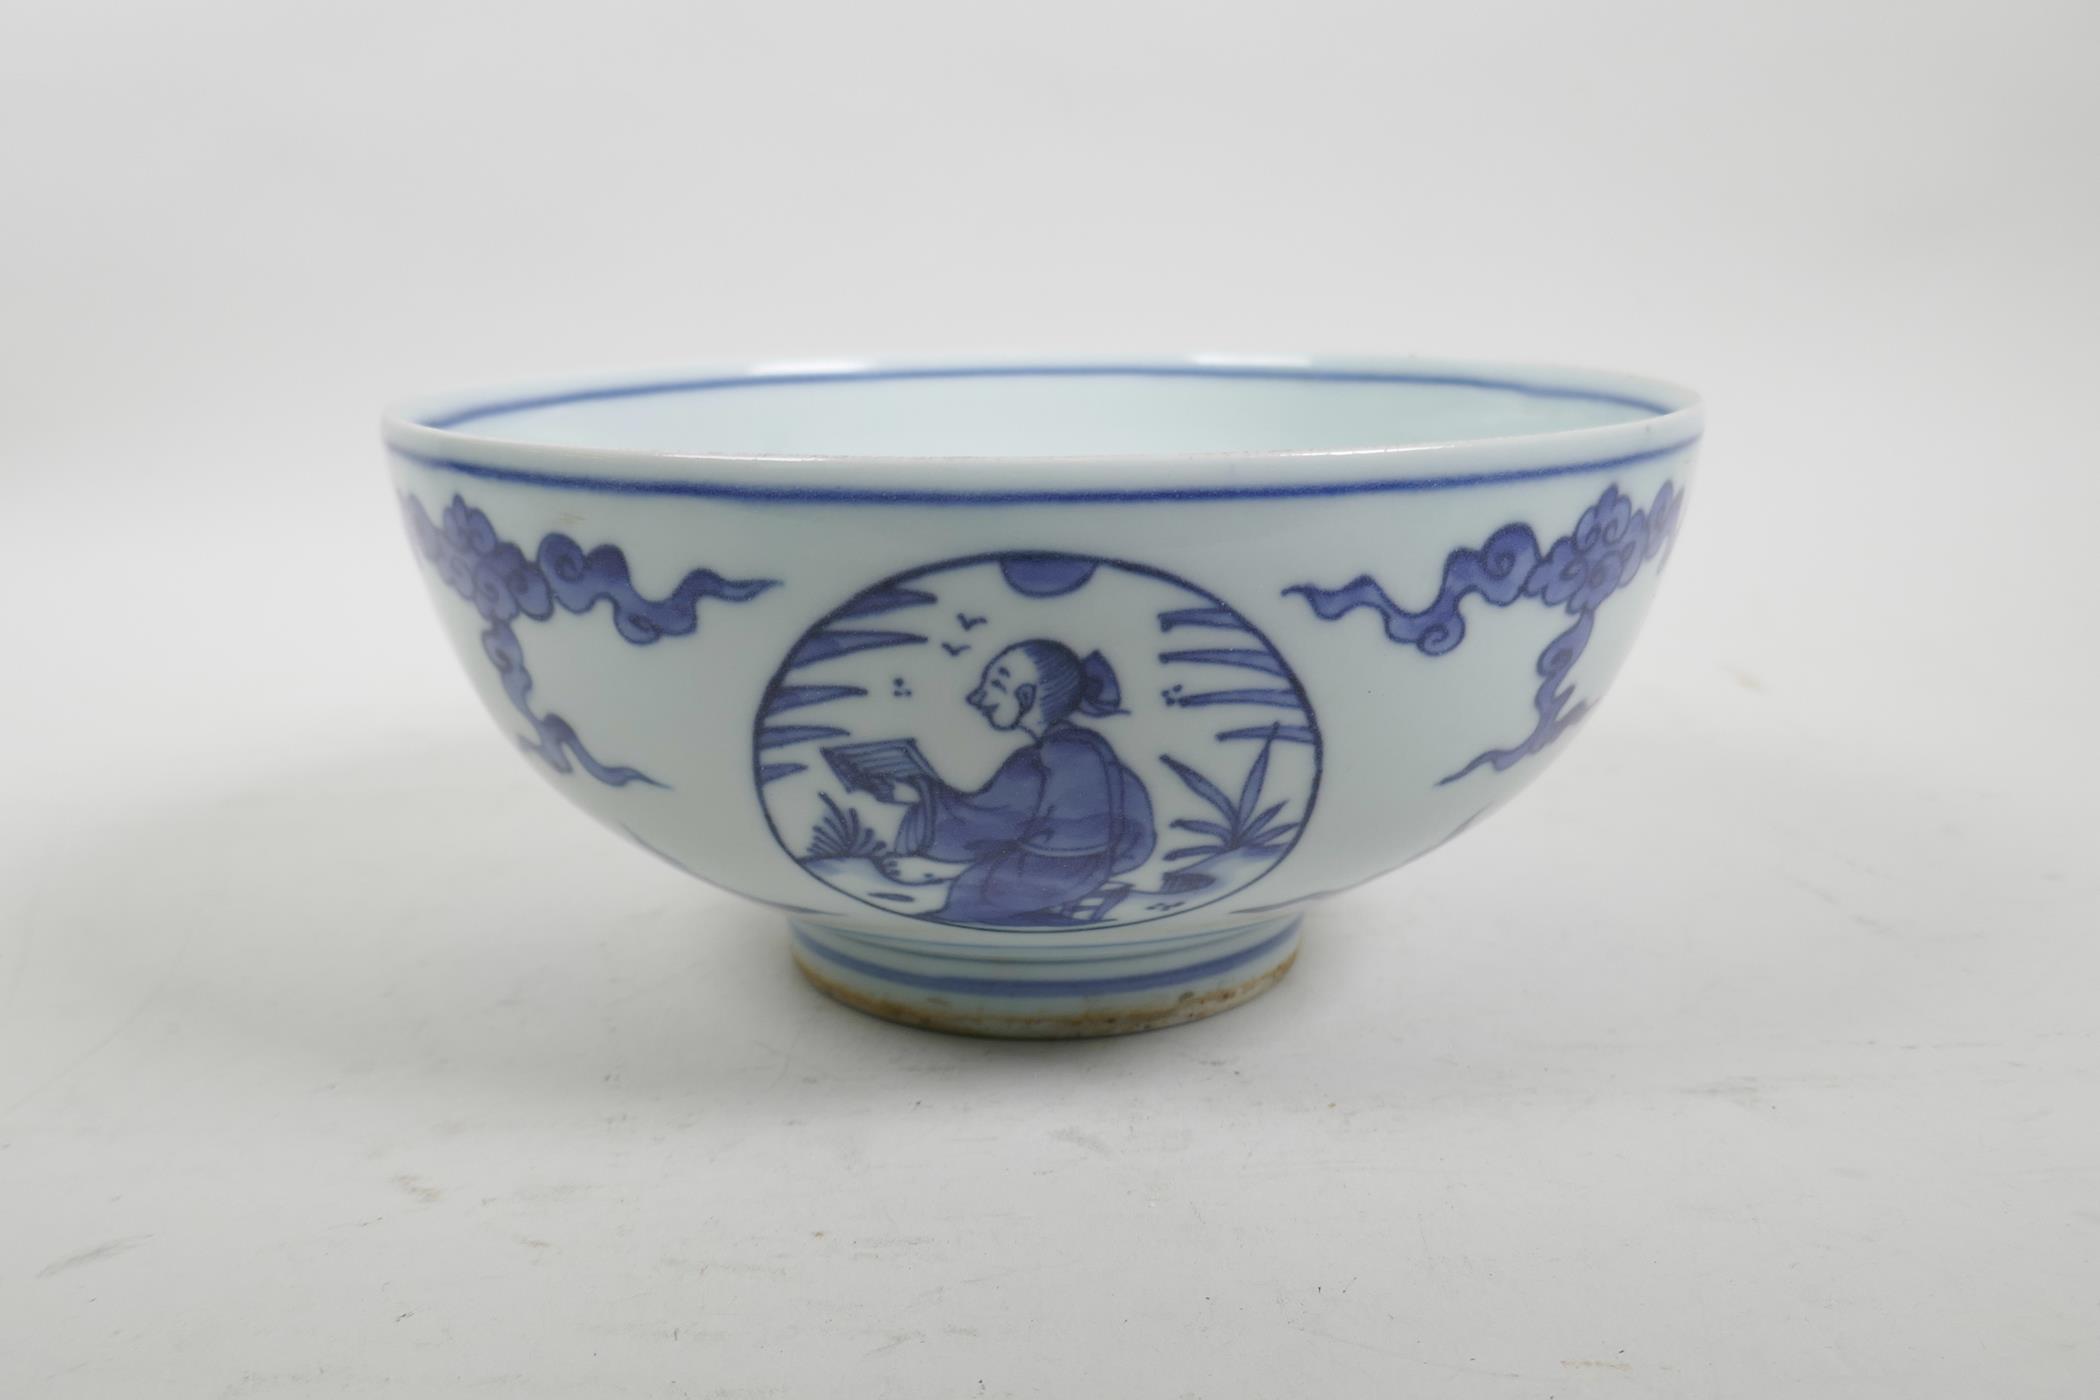 A Chinese blue and white bowl with decorative figural panels, 4 character mark to base, 8" diameter - Image 3 of 7